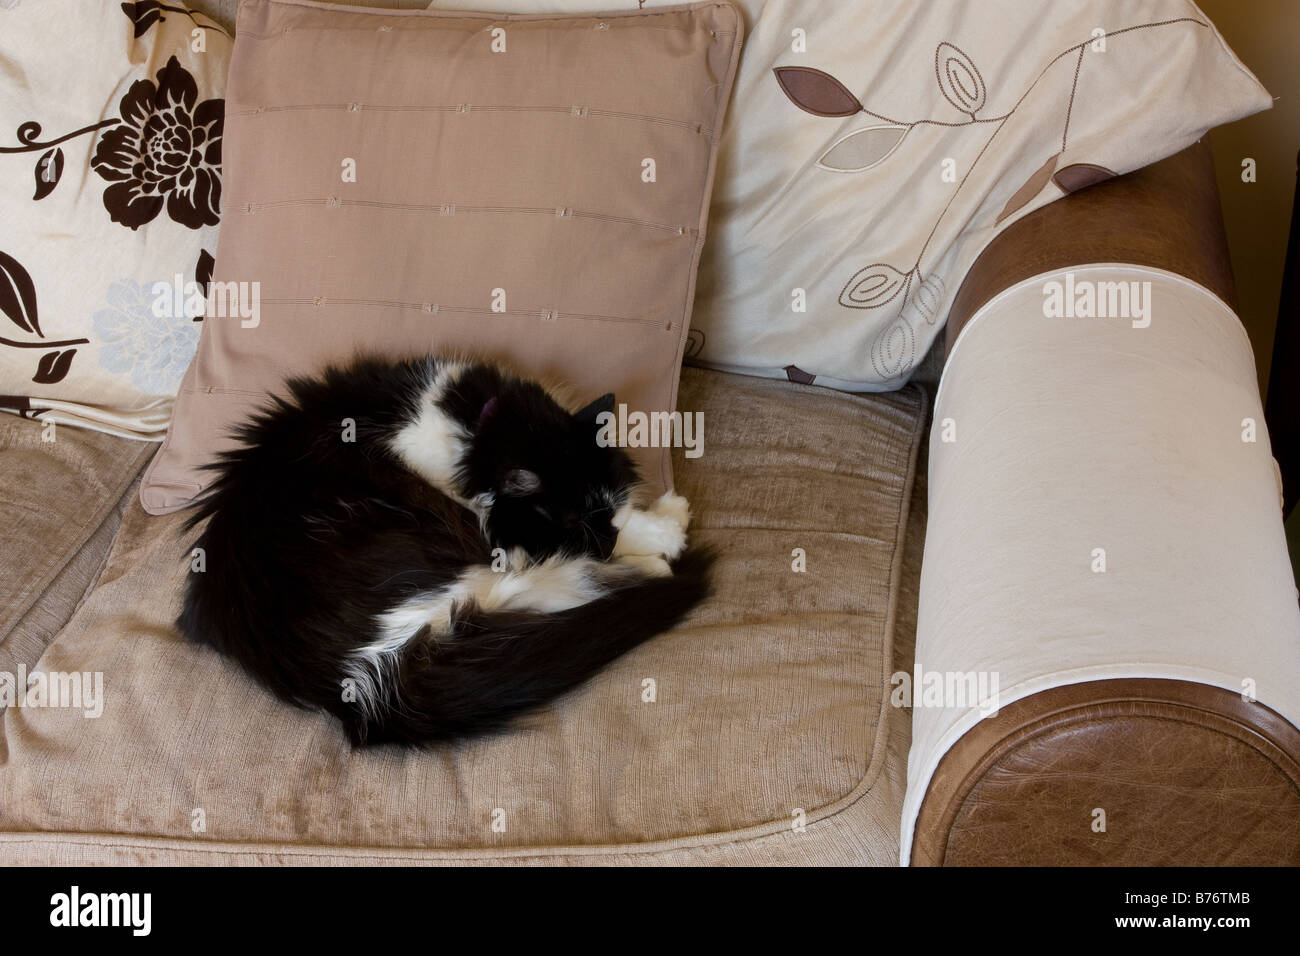 Black and White cat curled up sleeping on sofa Stock Photo